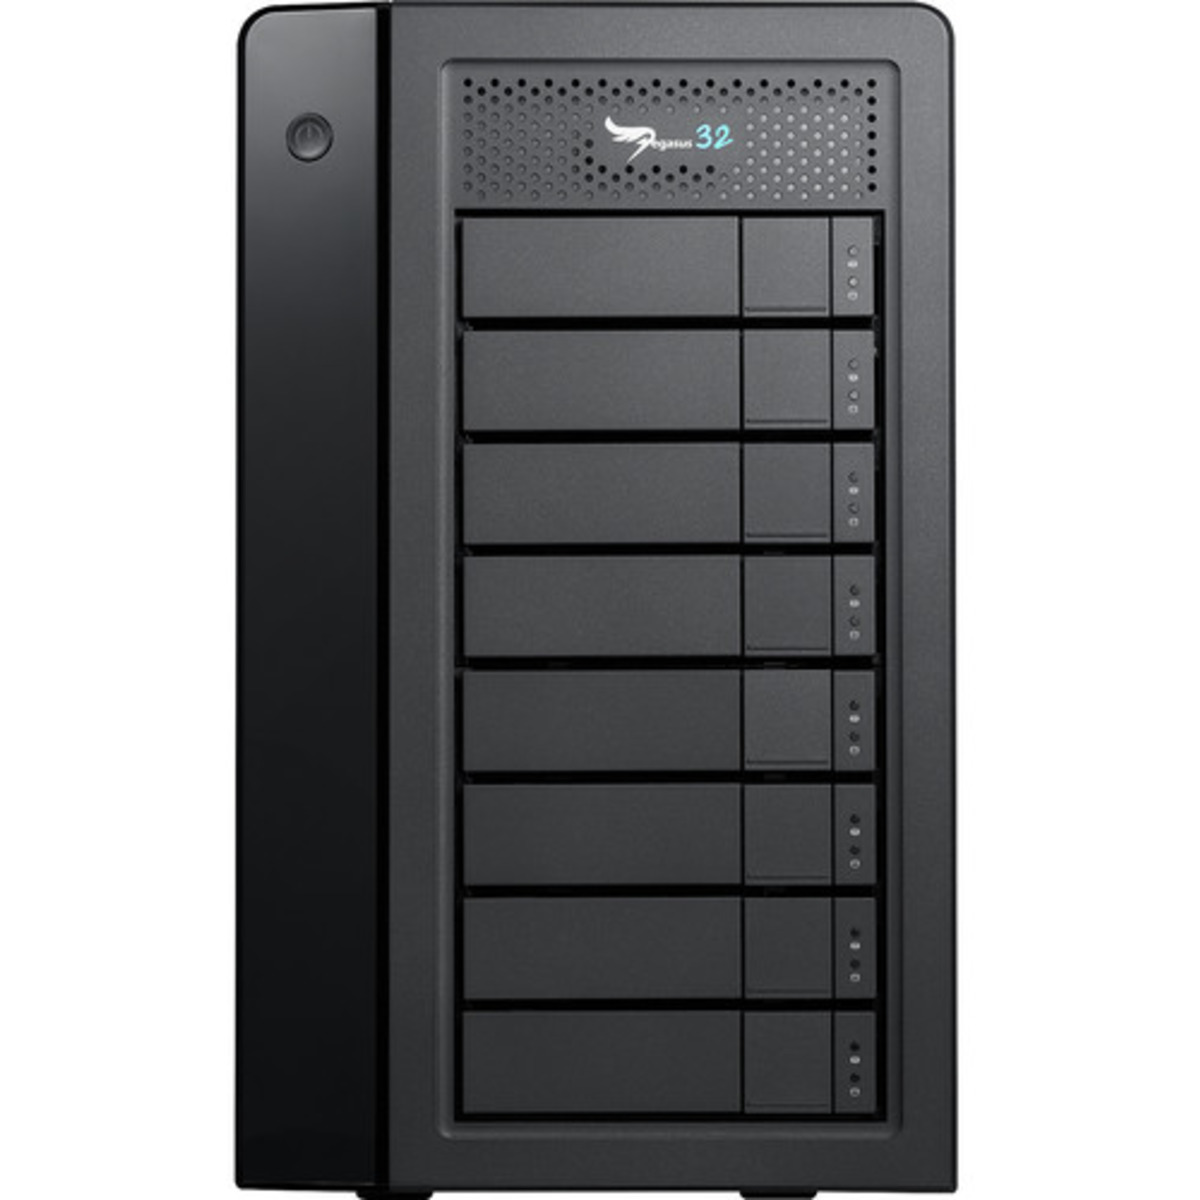 Promise Technology Pegasus32 R8 Thunderbolt 3 120tb 8-Bay Desktop Multimedia / Power User / Business DAS - Direct Attached Storage Device 5x24tb Western Digital Ultrastar HC580 SED WUH722424ALE6L1 3.5 7200rpm SATA 6Gb/s HDD ENTERPRISE Class Drives Installed - Burn-In Tested - ON SALE Pegasus32 R8 Thunderbolt 3